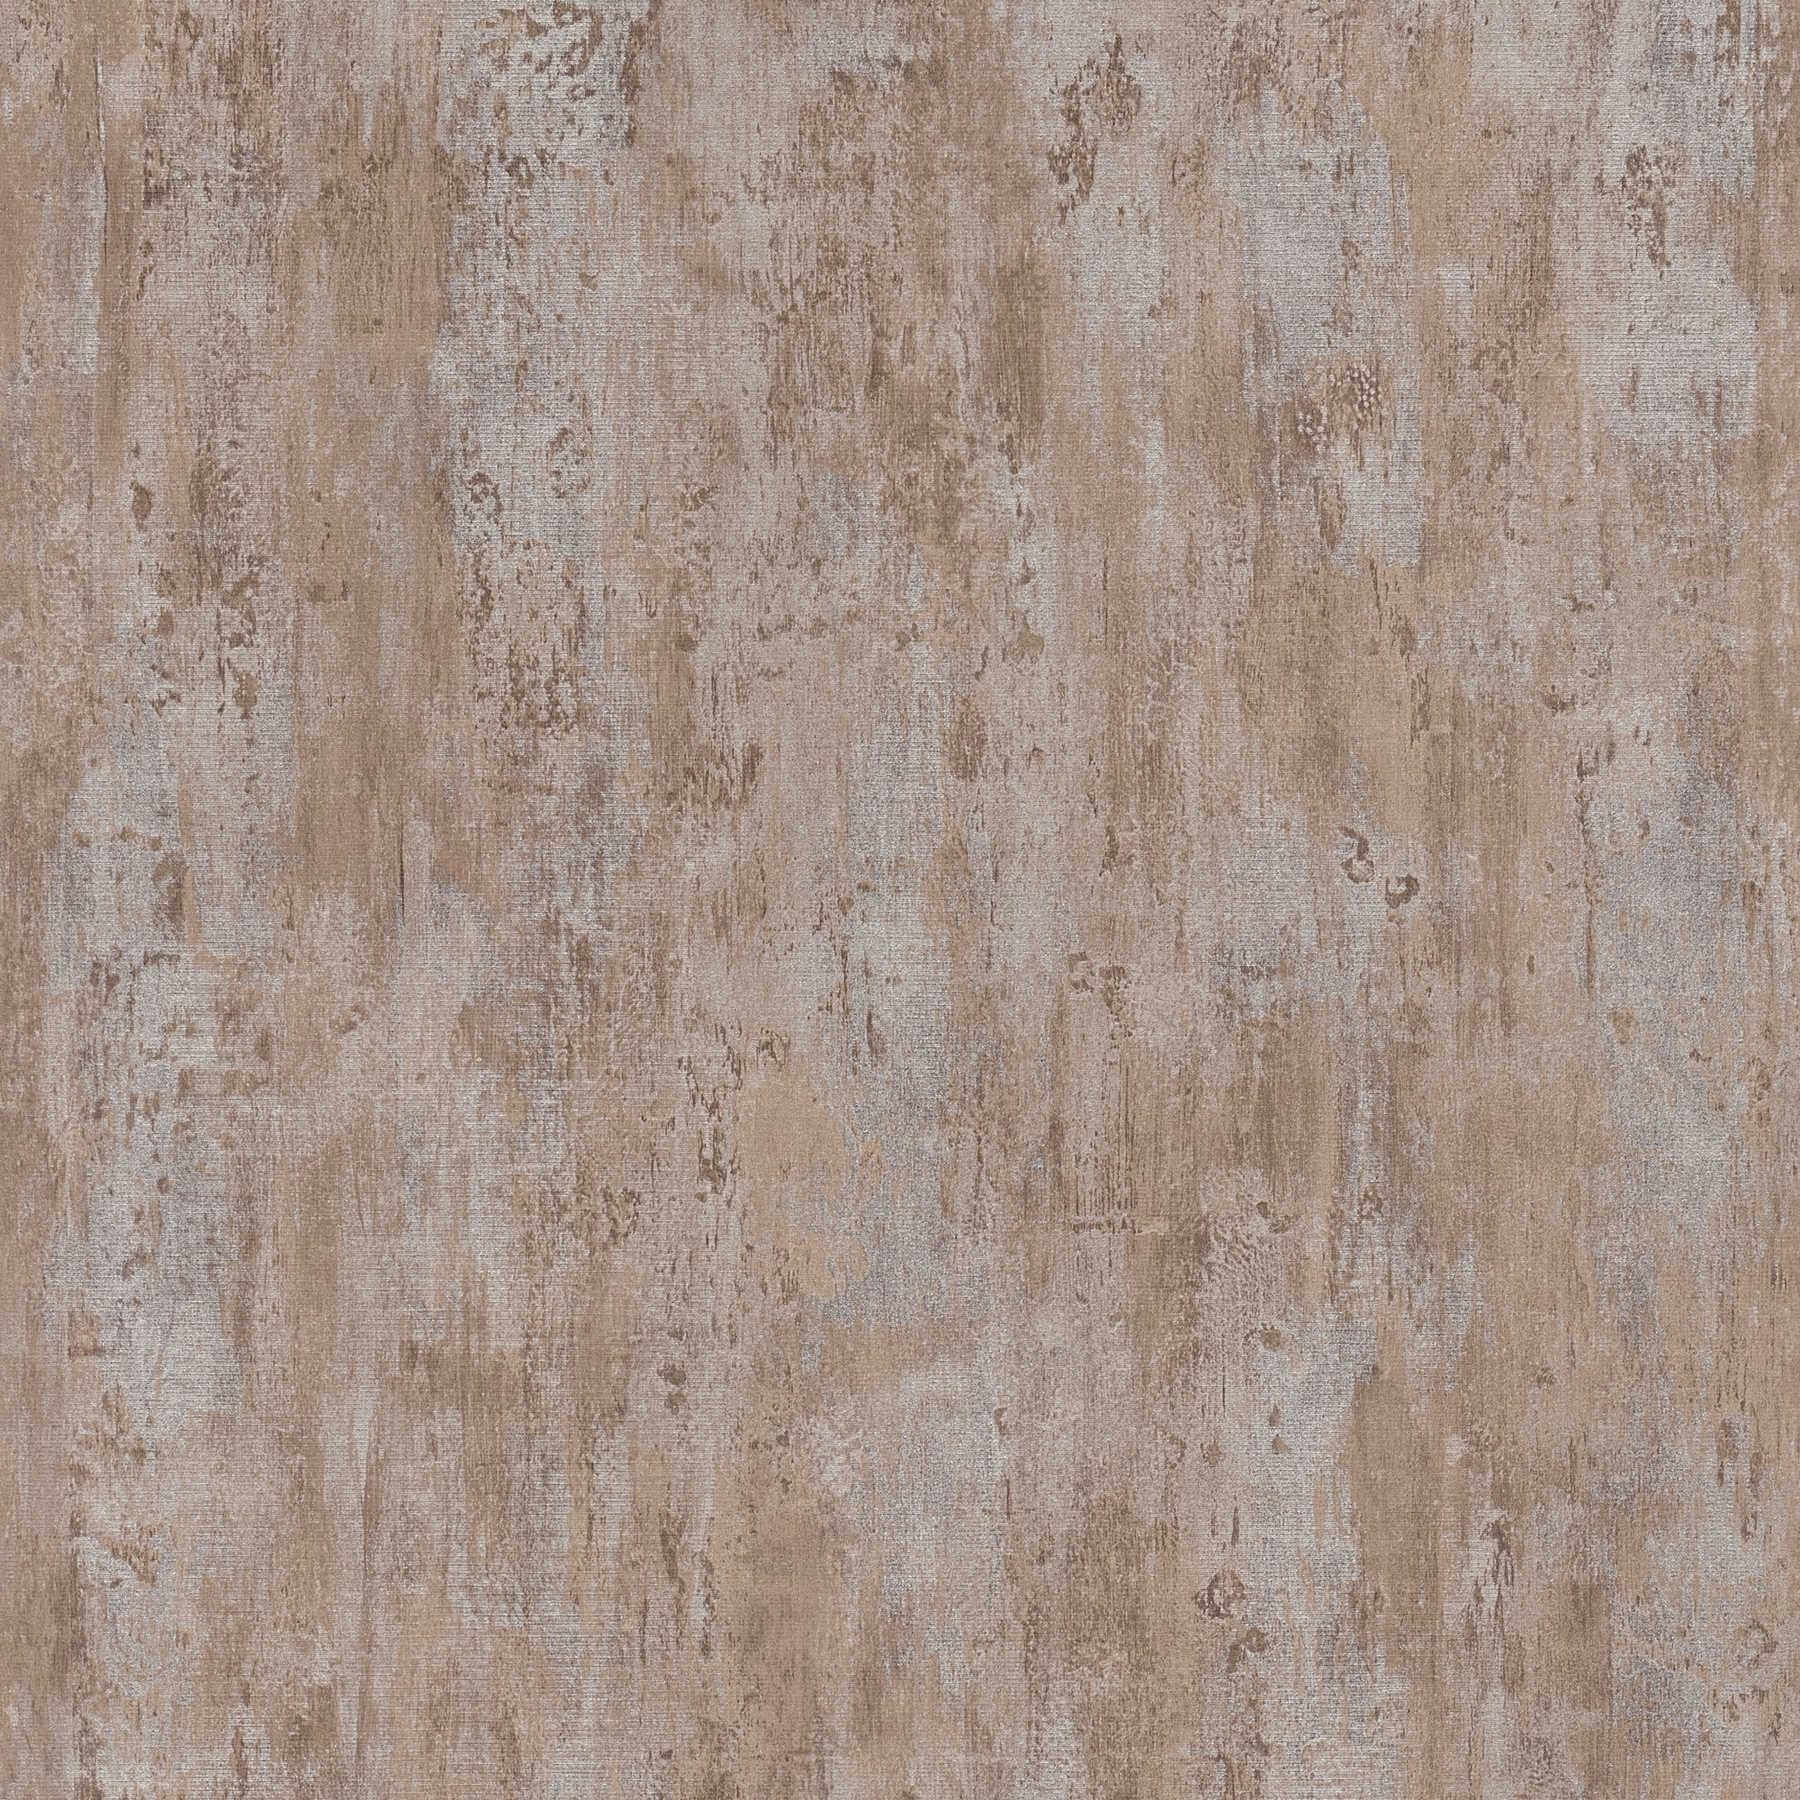 Non-woven wallpaper colour pattern, used look for industrial design - grey, brown
